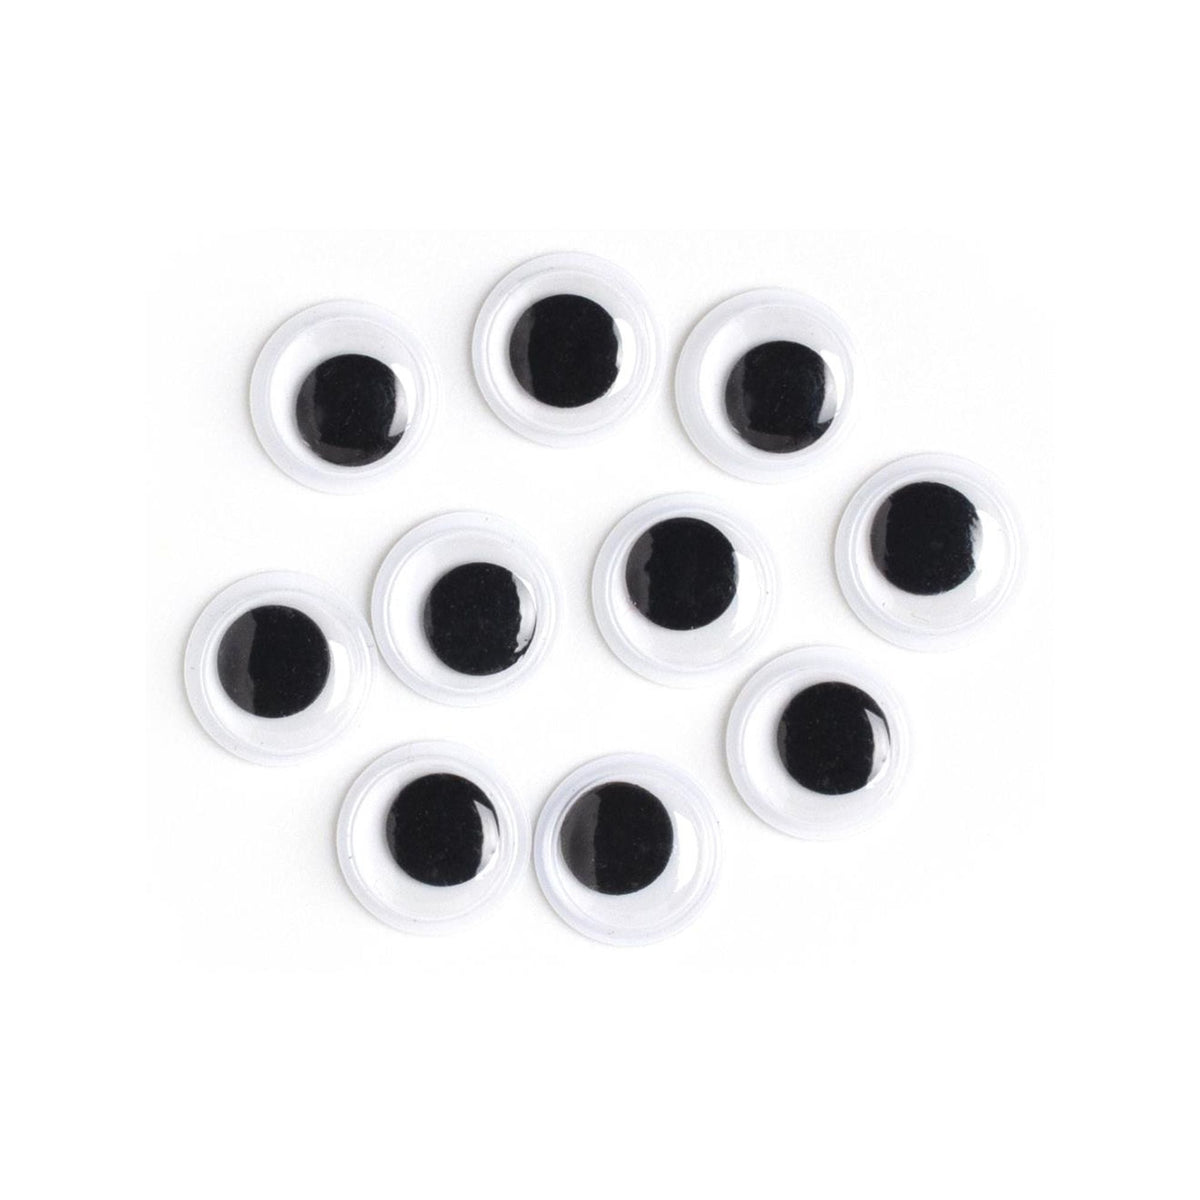 7mm Craft Eyes Small Wiggle Eyes 7mm Paste-on 20 